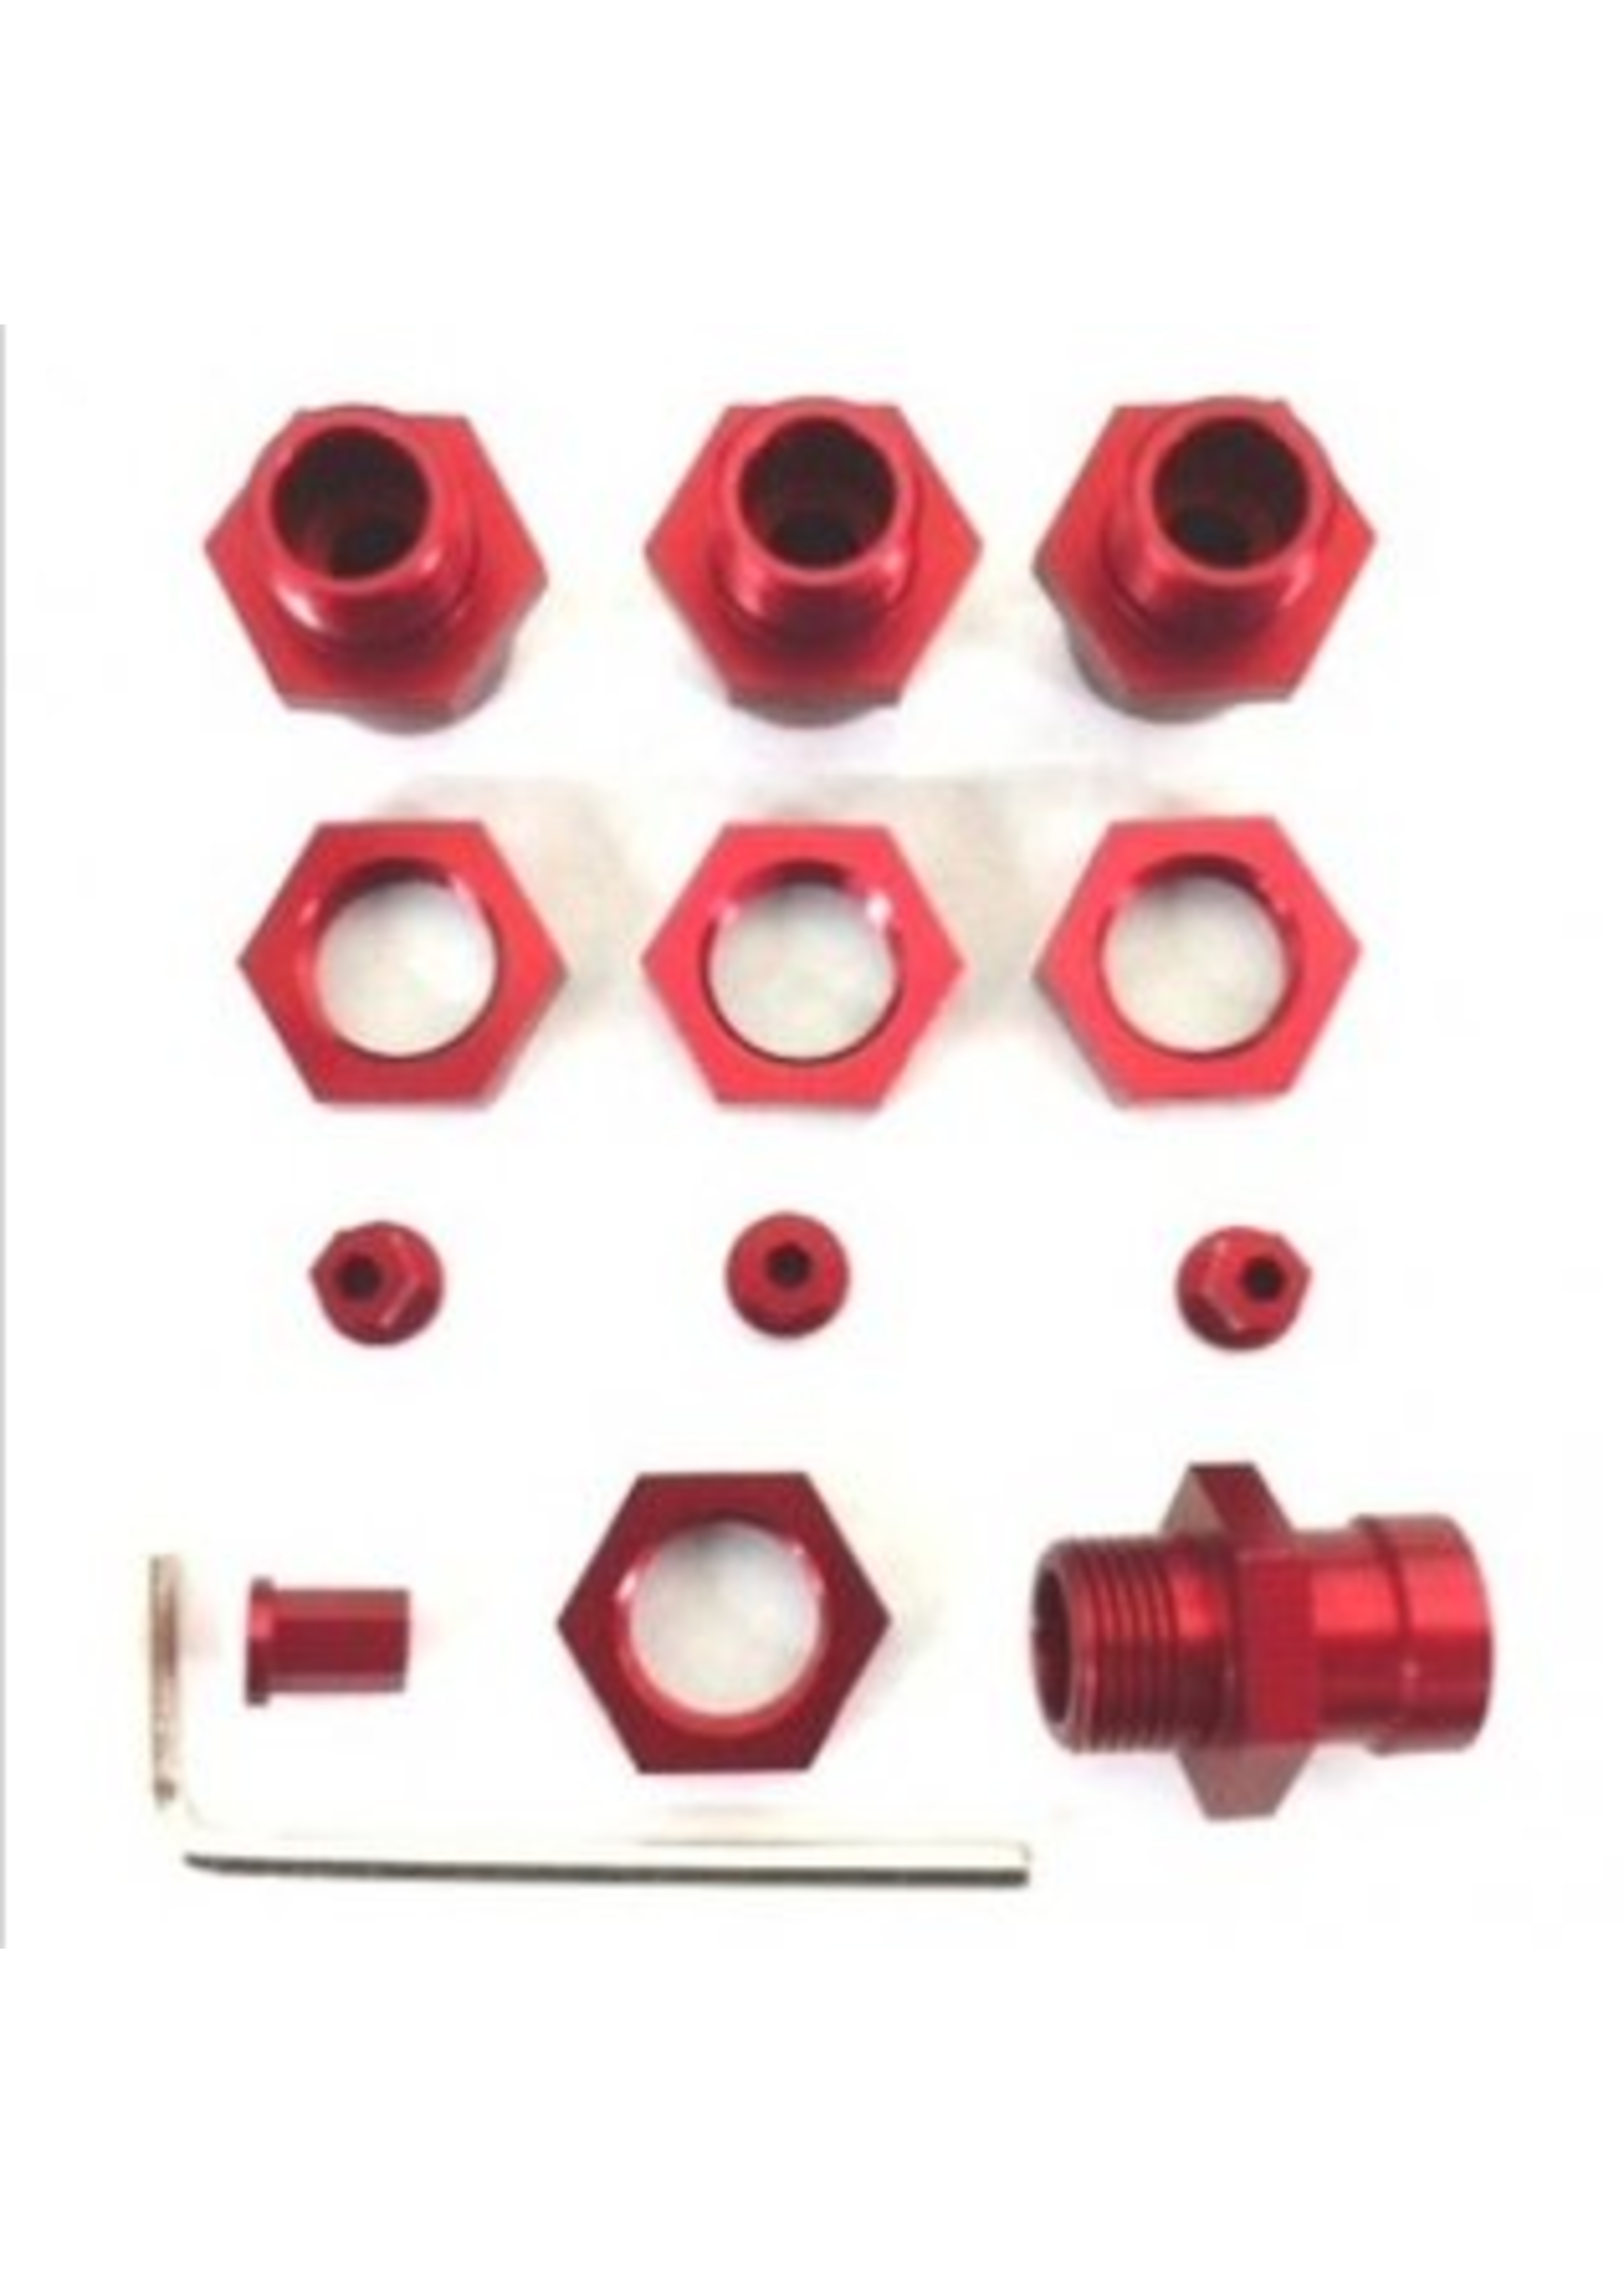 ST Racing Concepts SPTST1654-17R ST Racing Concepts CNC Machined Aluminum 17mm hex adatpers for Slash 4x4/Stampede 4x4/Rally (Red)